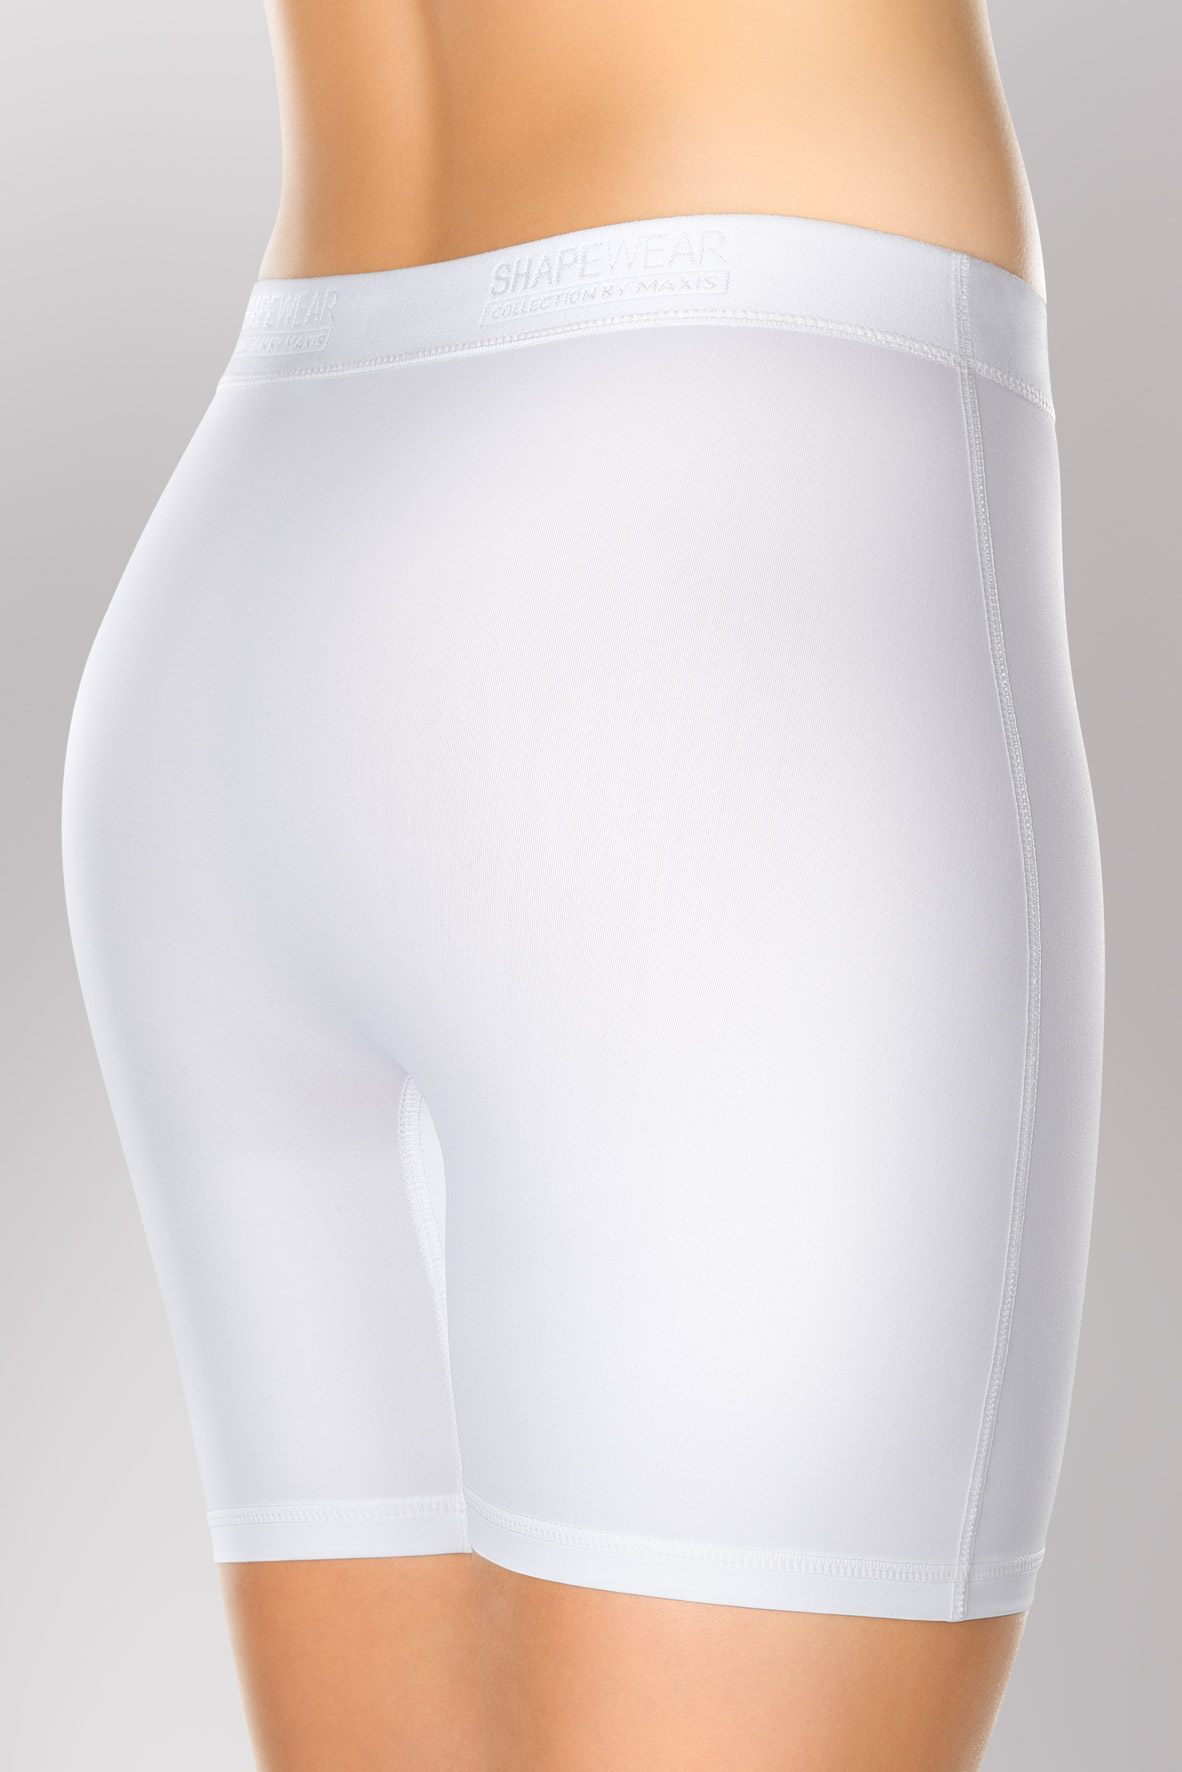 MAXIS Lifting Briefs with legs | medi-expert.sk